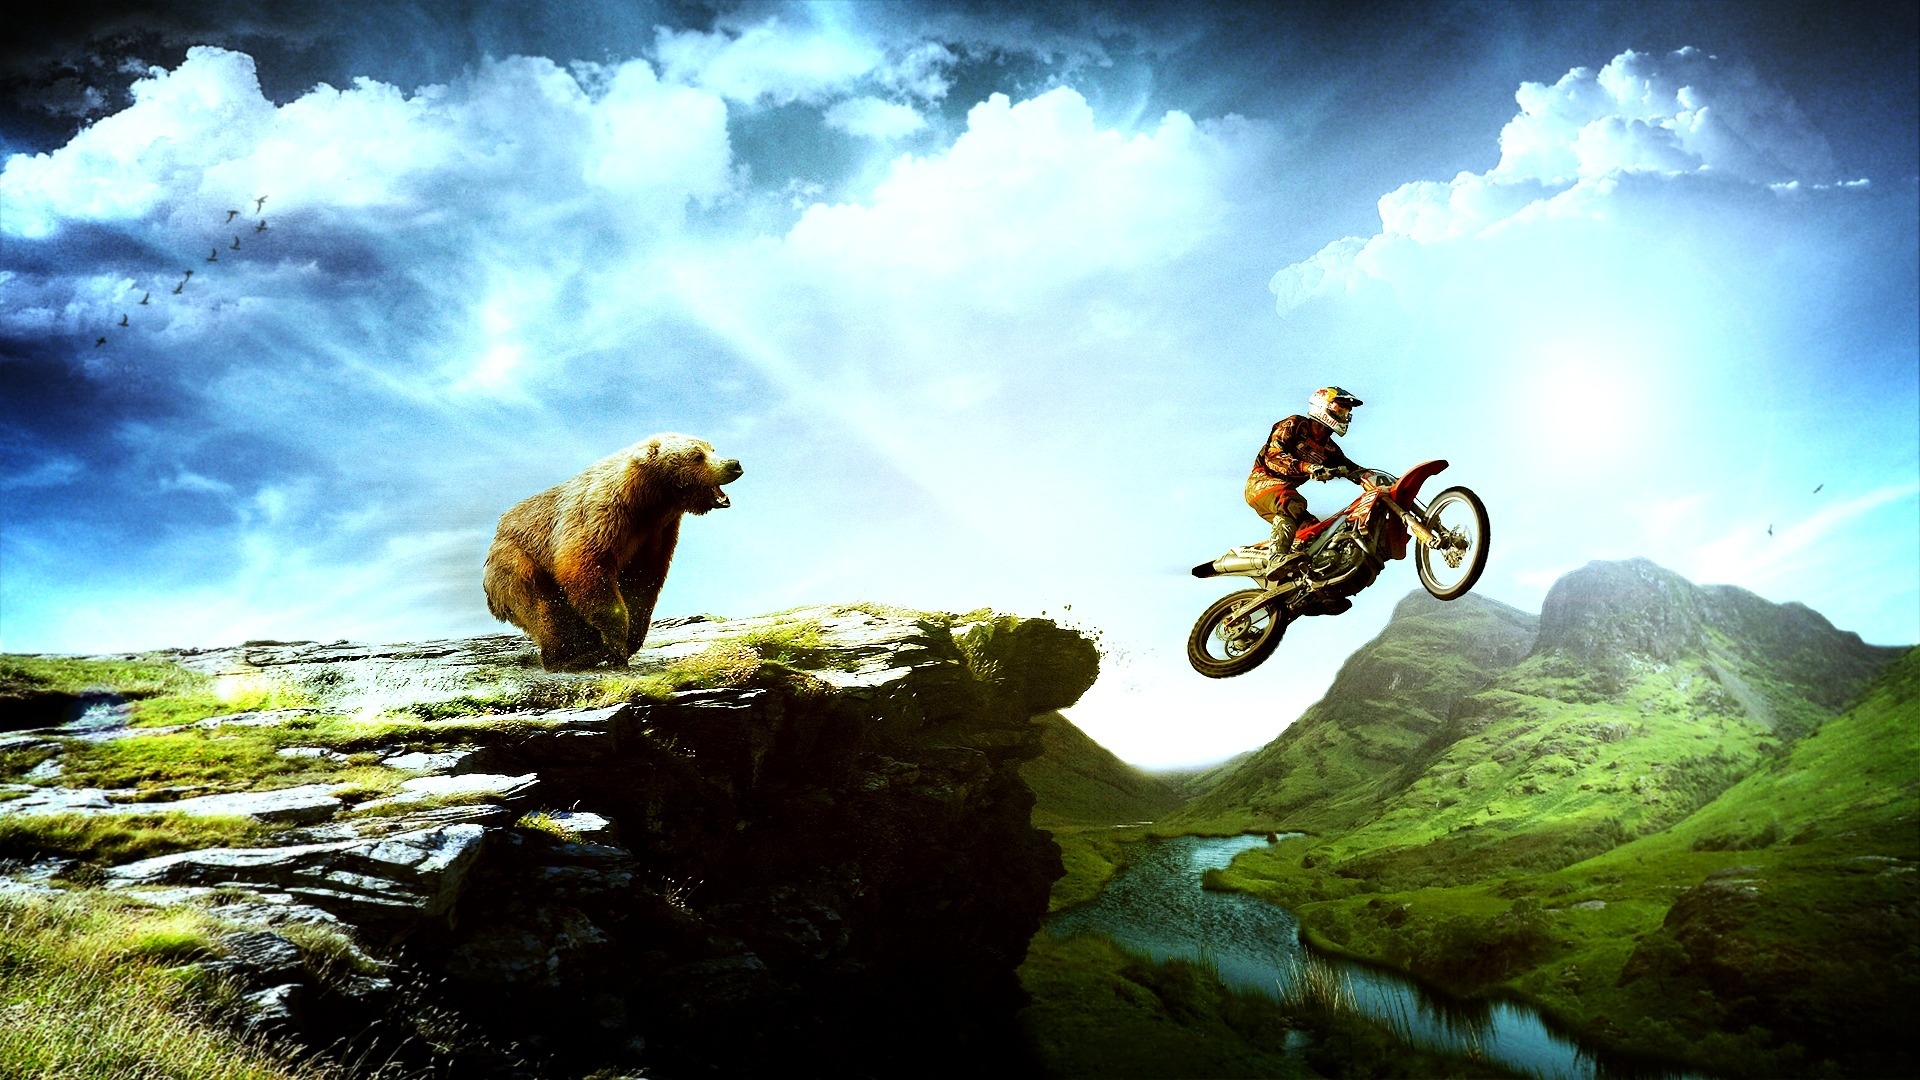 moto x play wallpapers hd,nature,vehicle,sky,extreme sport,organism